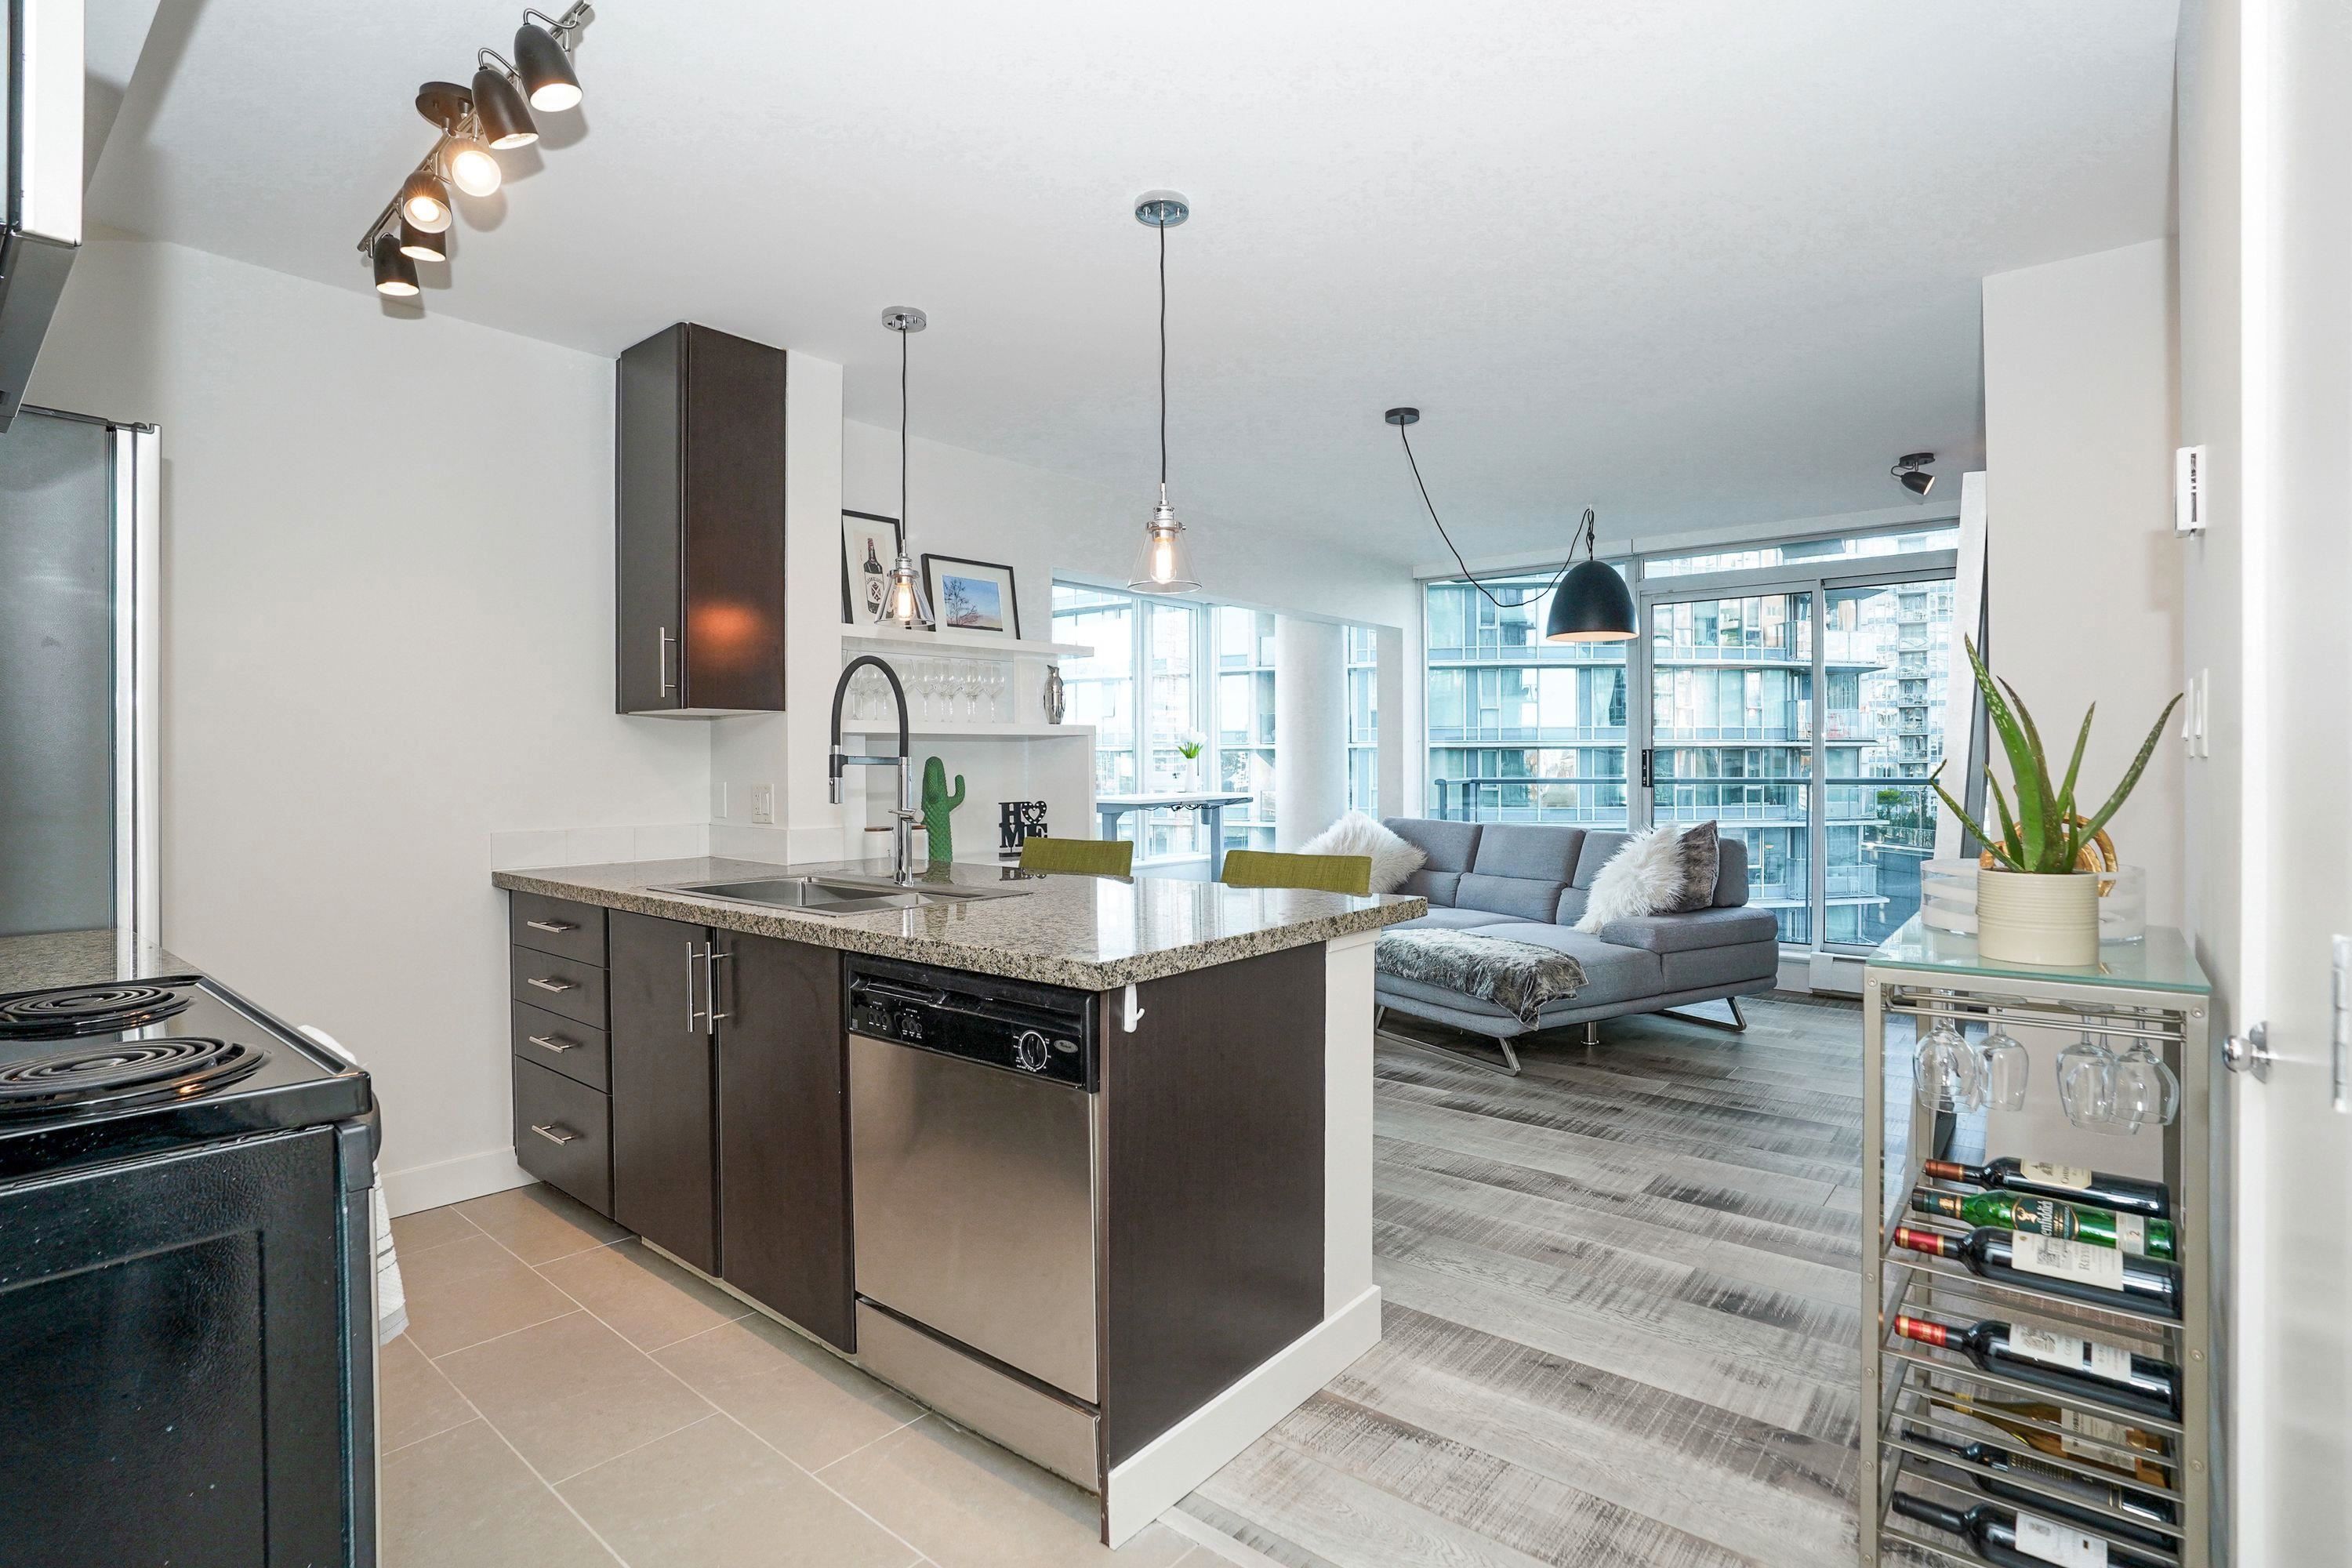 Main Photo: 1106 688 ABBOTT STREET in Vancouver: Downtown VW Condo for sale (Vancouver West)  : MLS®# R2630801